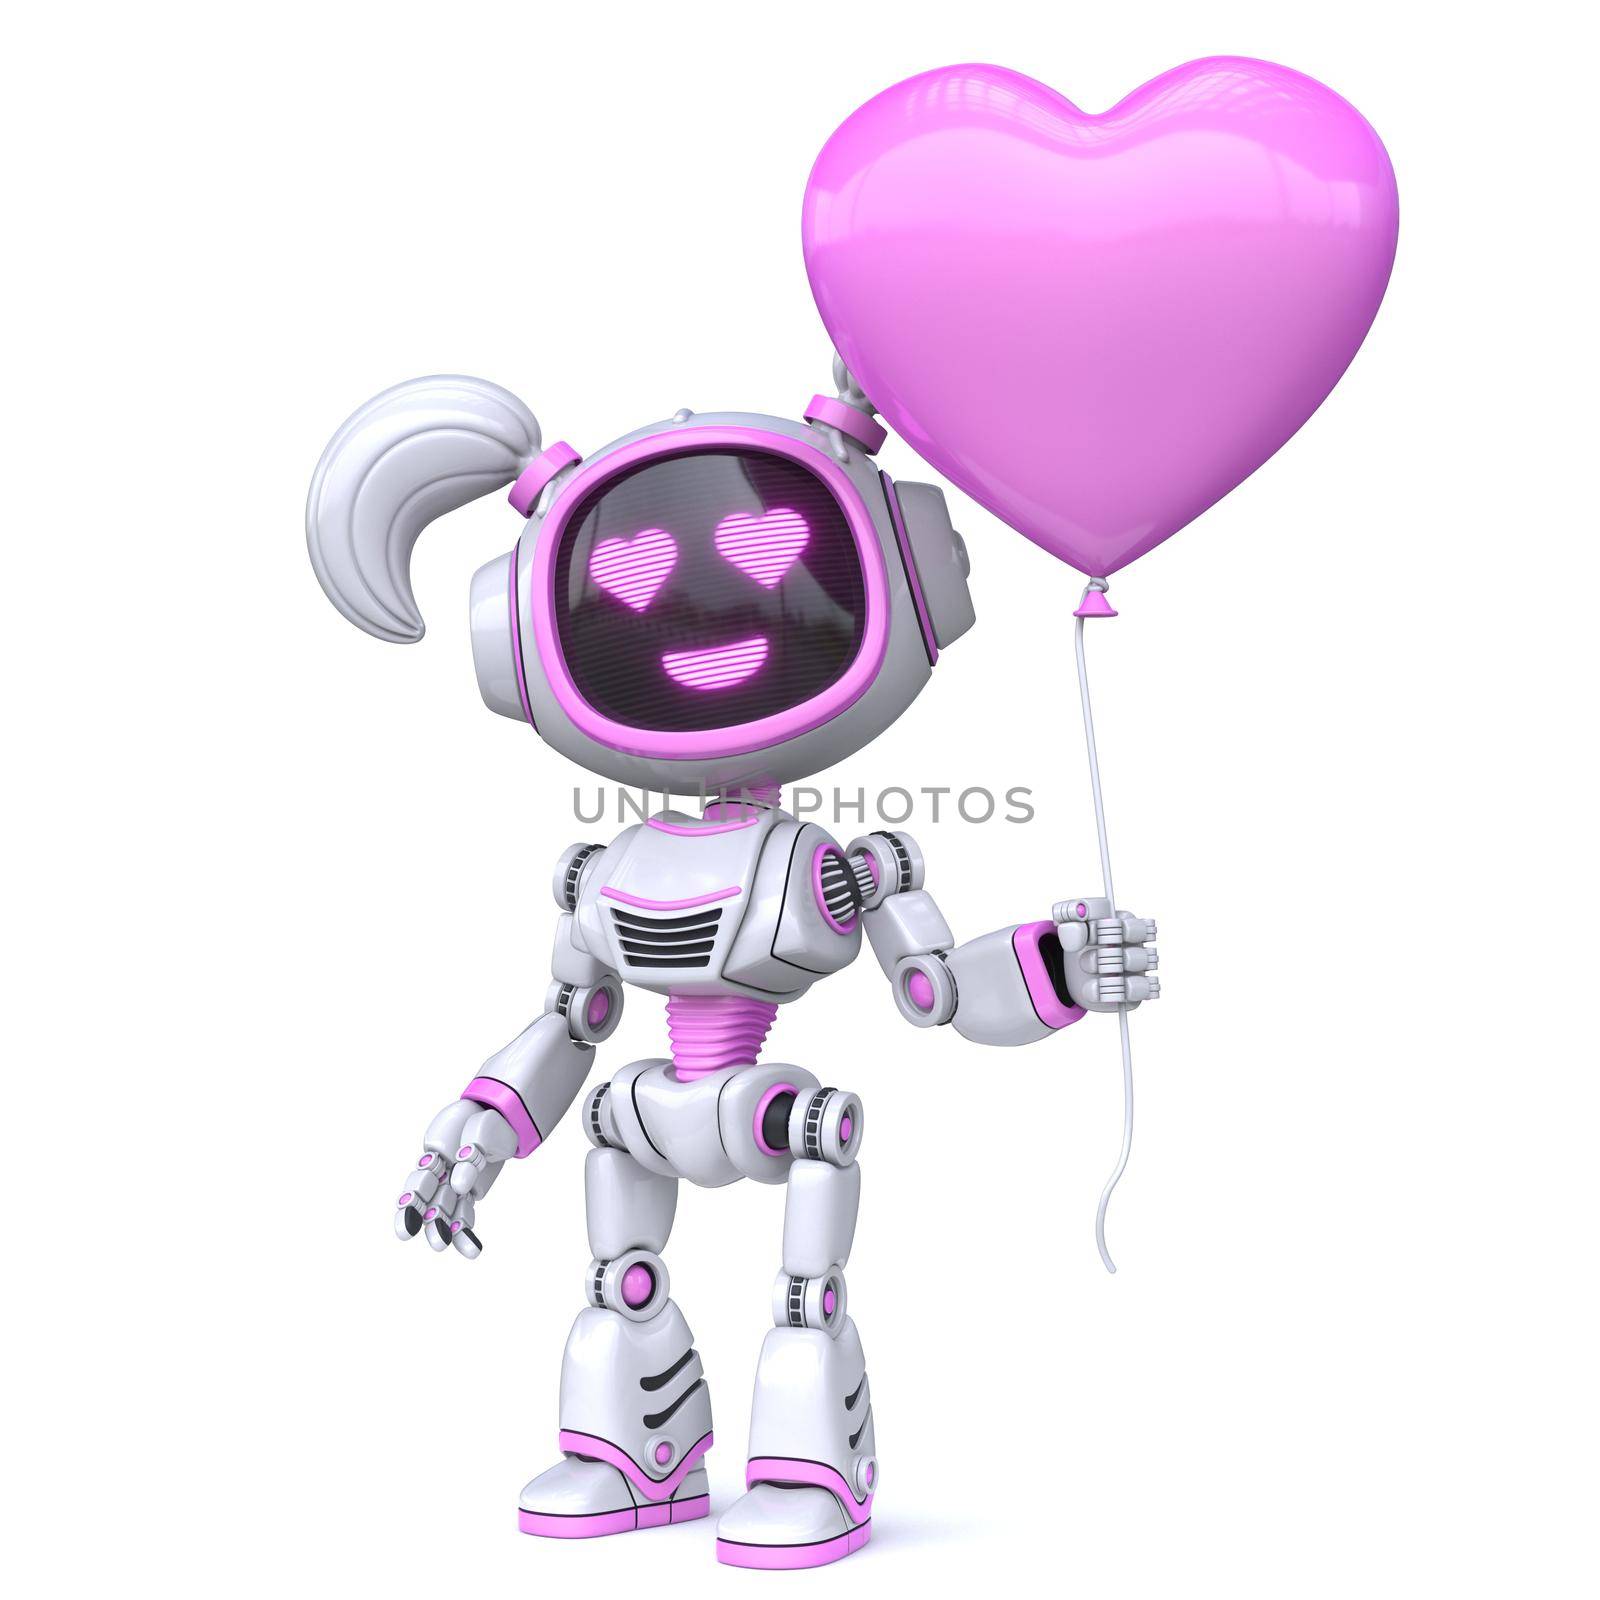 Cute pink girl robot hold heart shaped balloon 3D rendering illustration isolated on white background